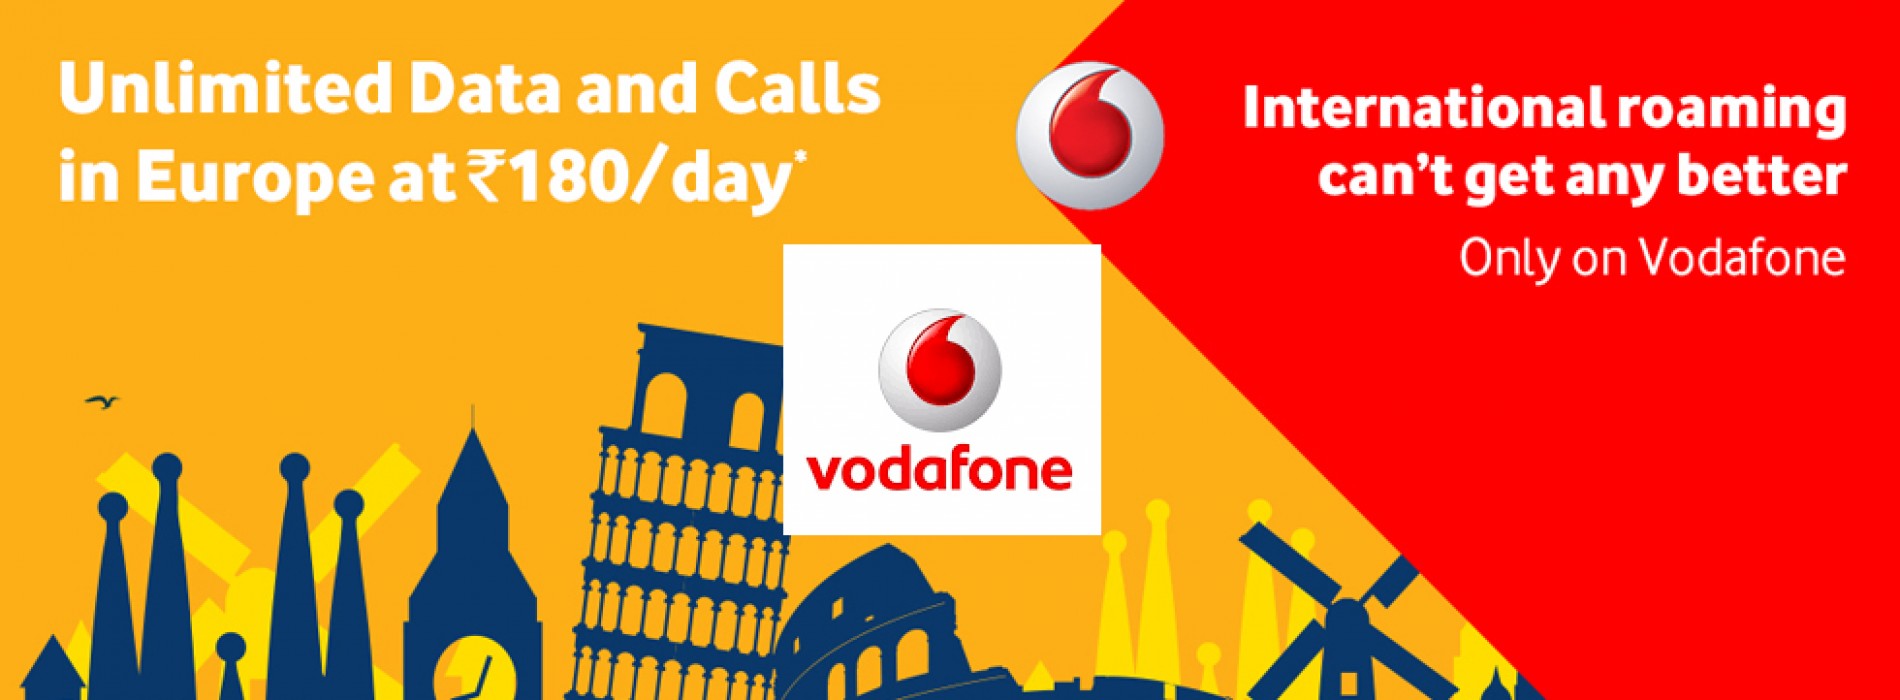 Vodafone launches First-Ever Truly Unlimited International Roaming pack – Vodafone i-RoamFREE